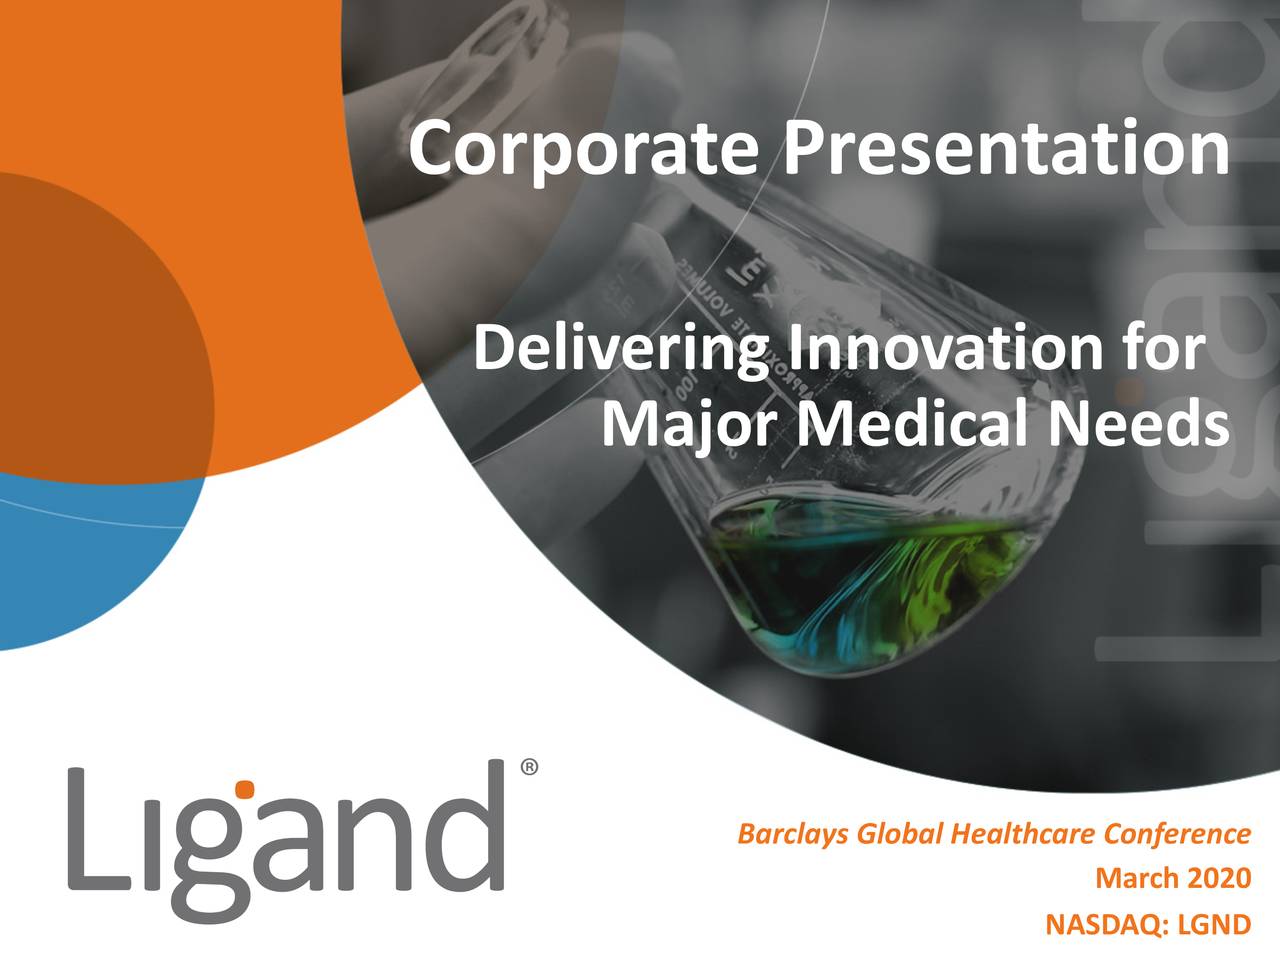 Ligand Pharmaceuticals (LGND) Presents At Barclays Global Healthcare